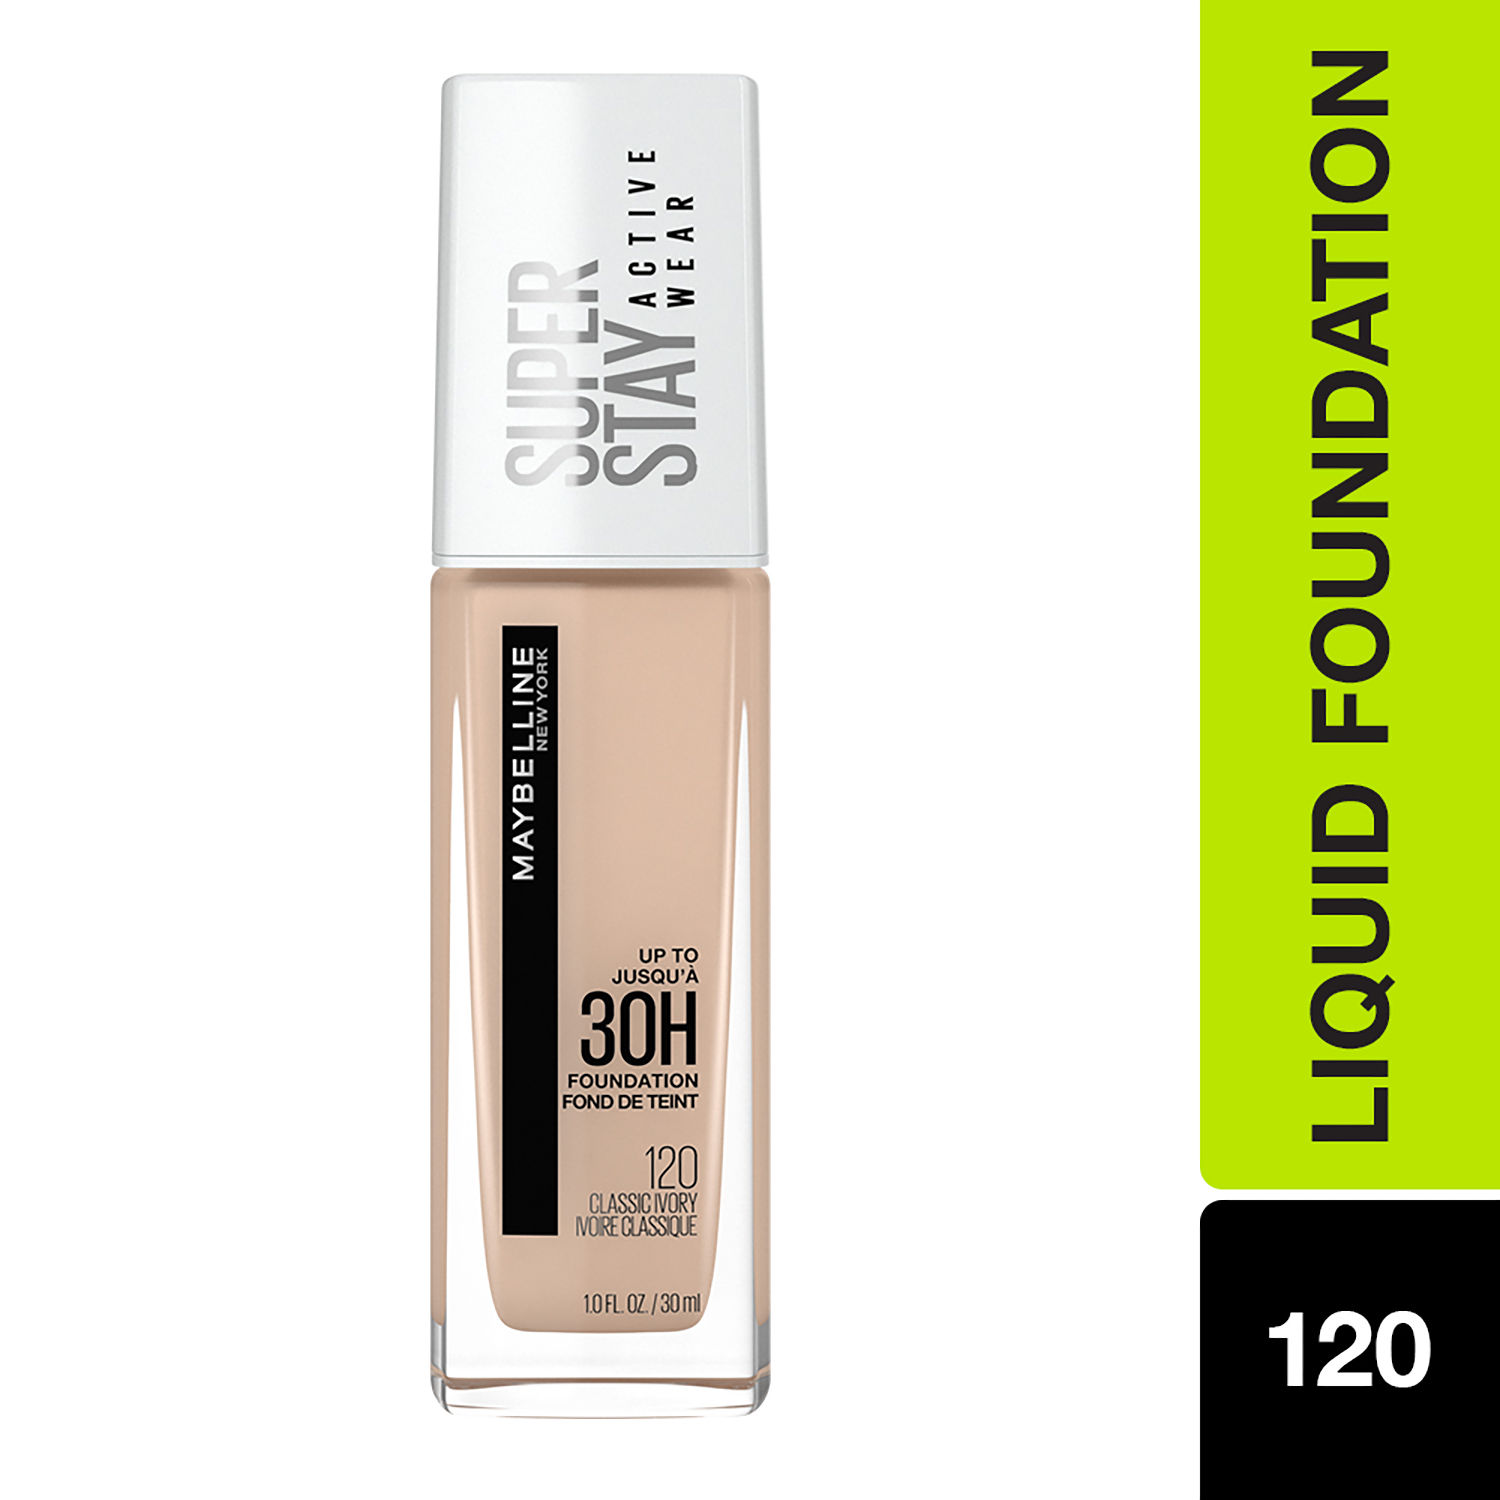 New Coverage Transfer Proof, Matte HR Maybelline Super Liquid Wear York 30ml Finish Foundation, Wear, Classic 120, Full 30 with Stay Ivory, Active